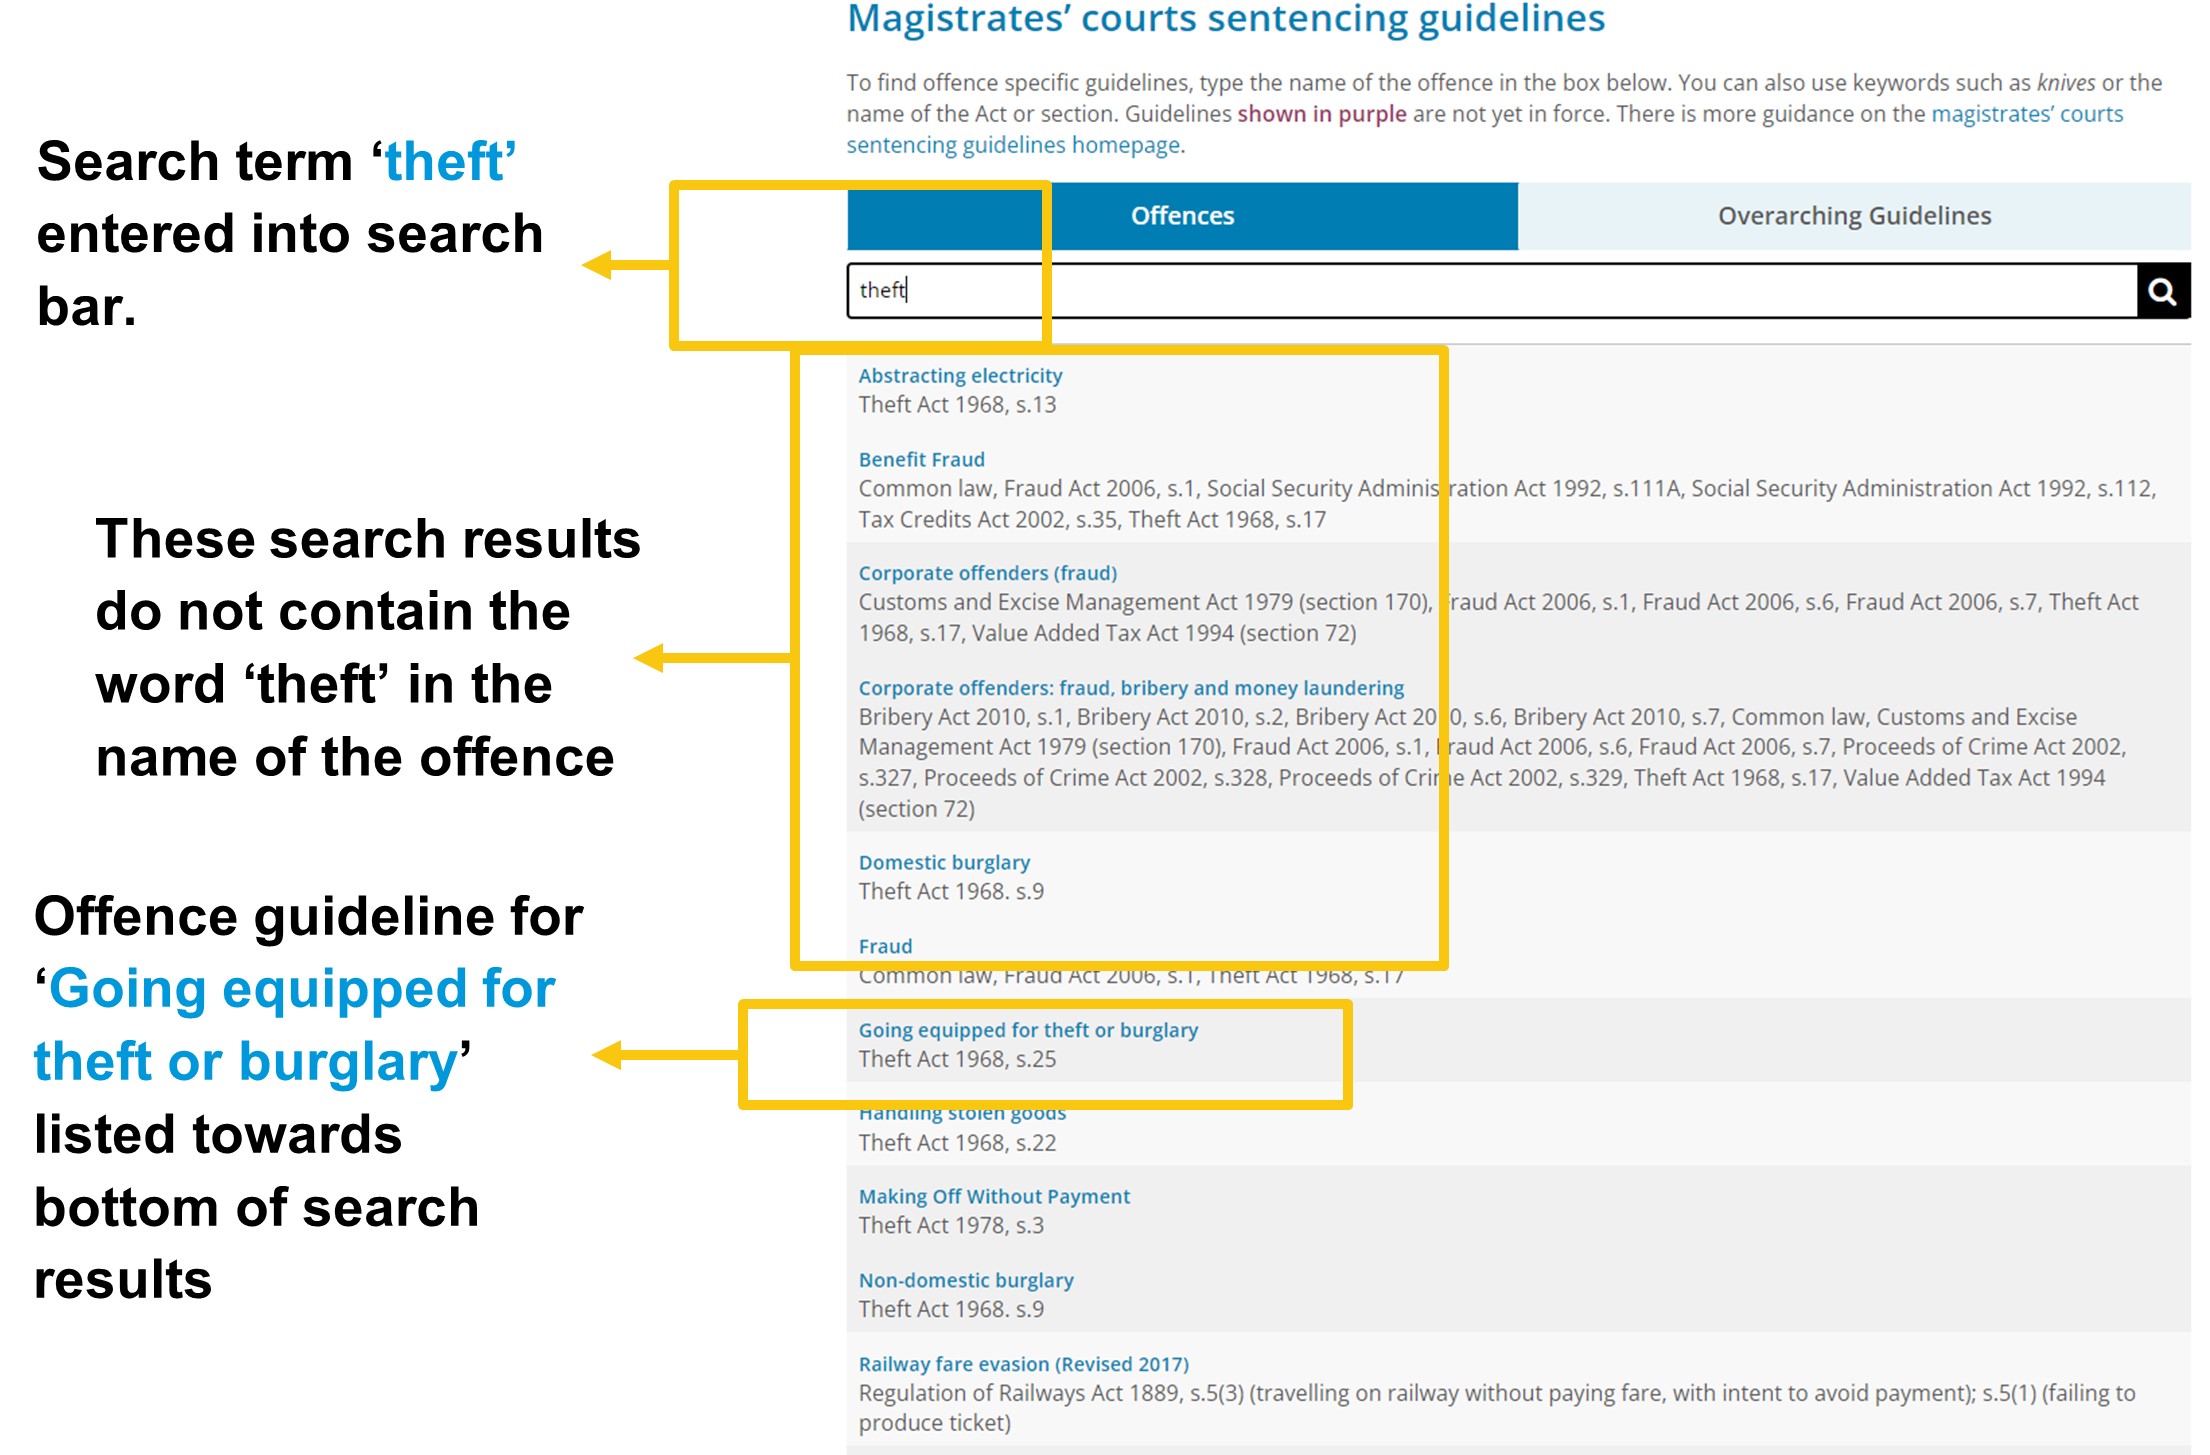 Image showing how when the term "theft" is entered into the guideline search bar, guidelines are returned which do not have the term" theft" in the name of the guideline. The guideline for "going equipped for theft or burglary" is listed towards the bottom of the search results